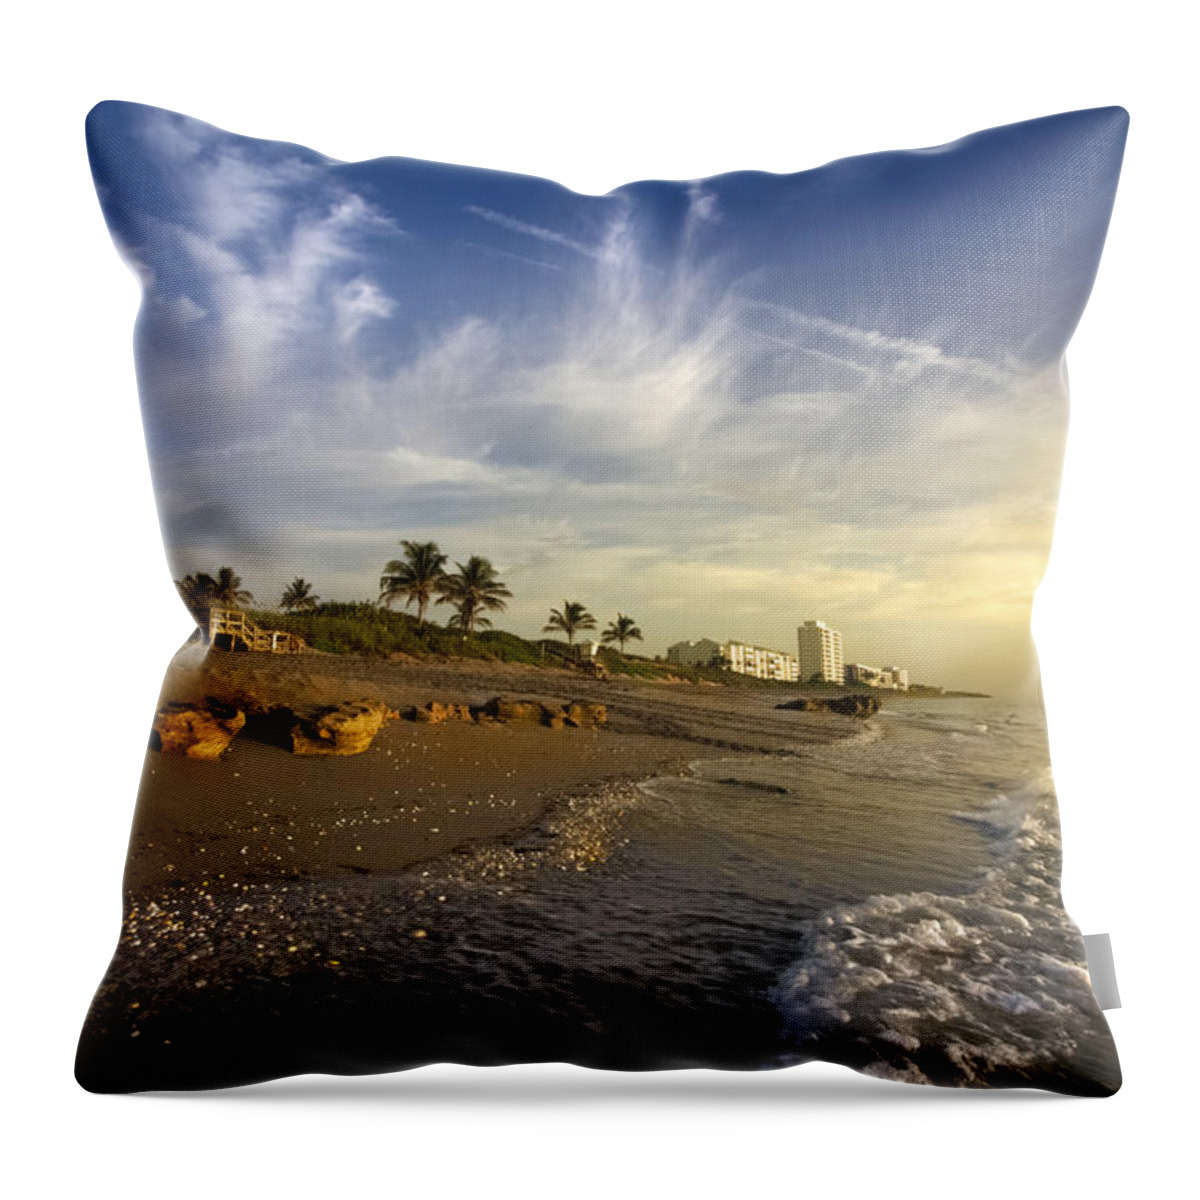 At Throw Pillow featuring the photograph Ocean's Soft Light by Debra and Dave Vanderlaan